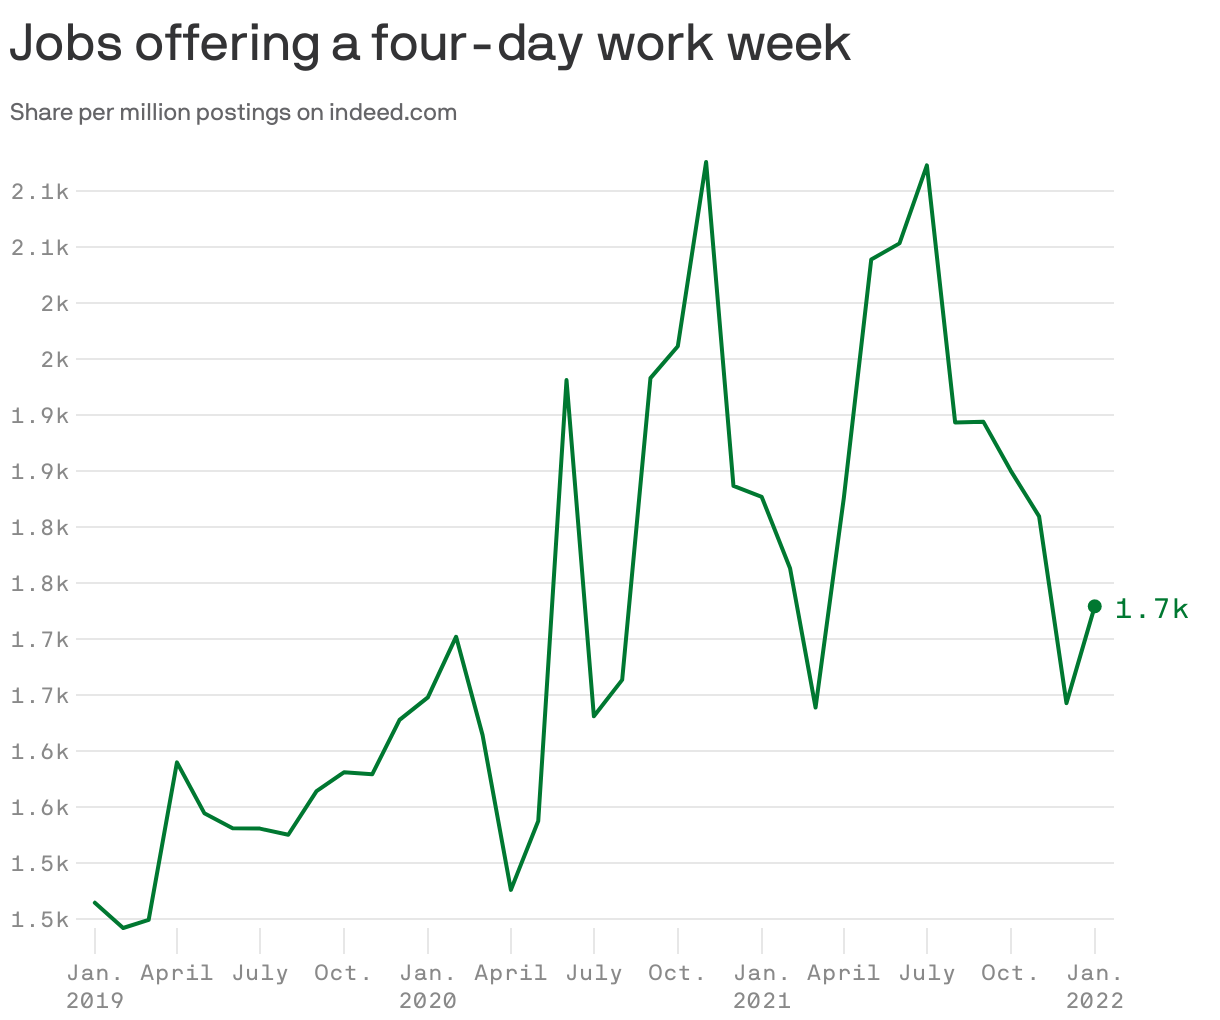 Jobs offering a four-day work week